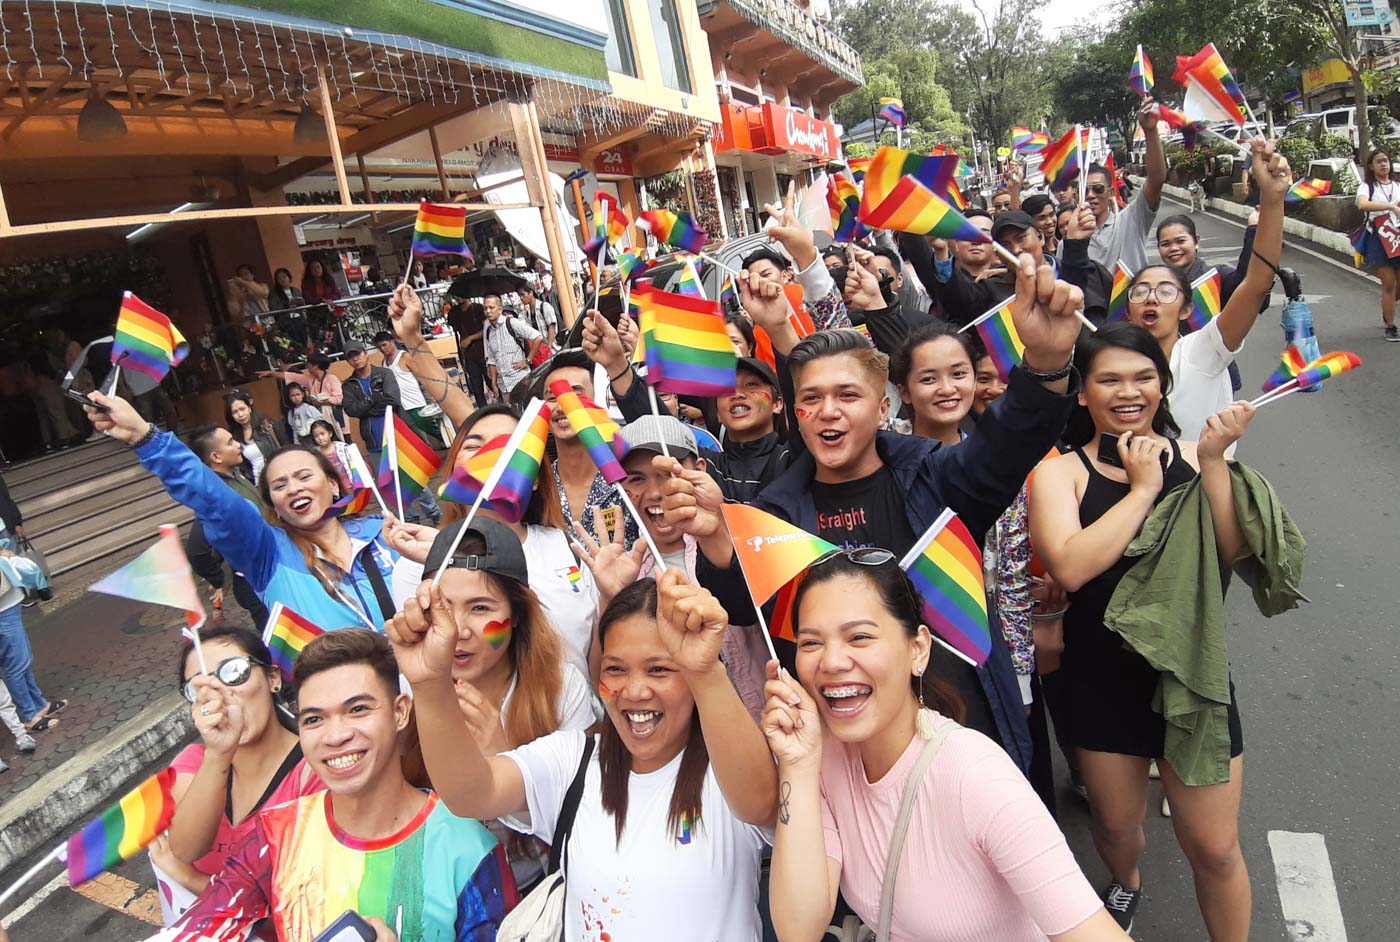 73 Of Filipinos Think Homosexuality Should Be Accepted By Society